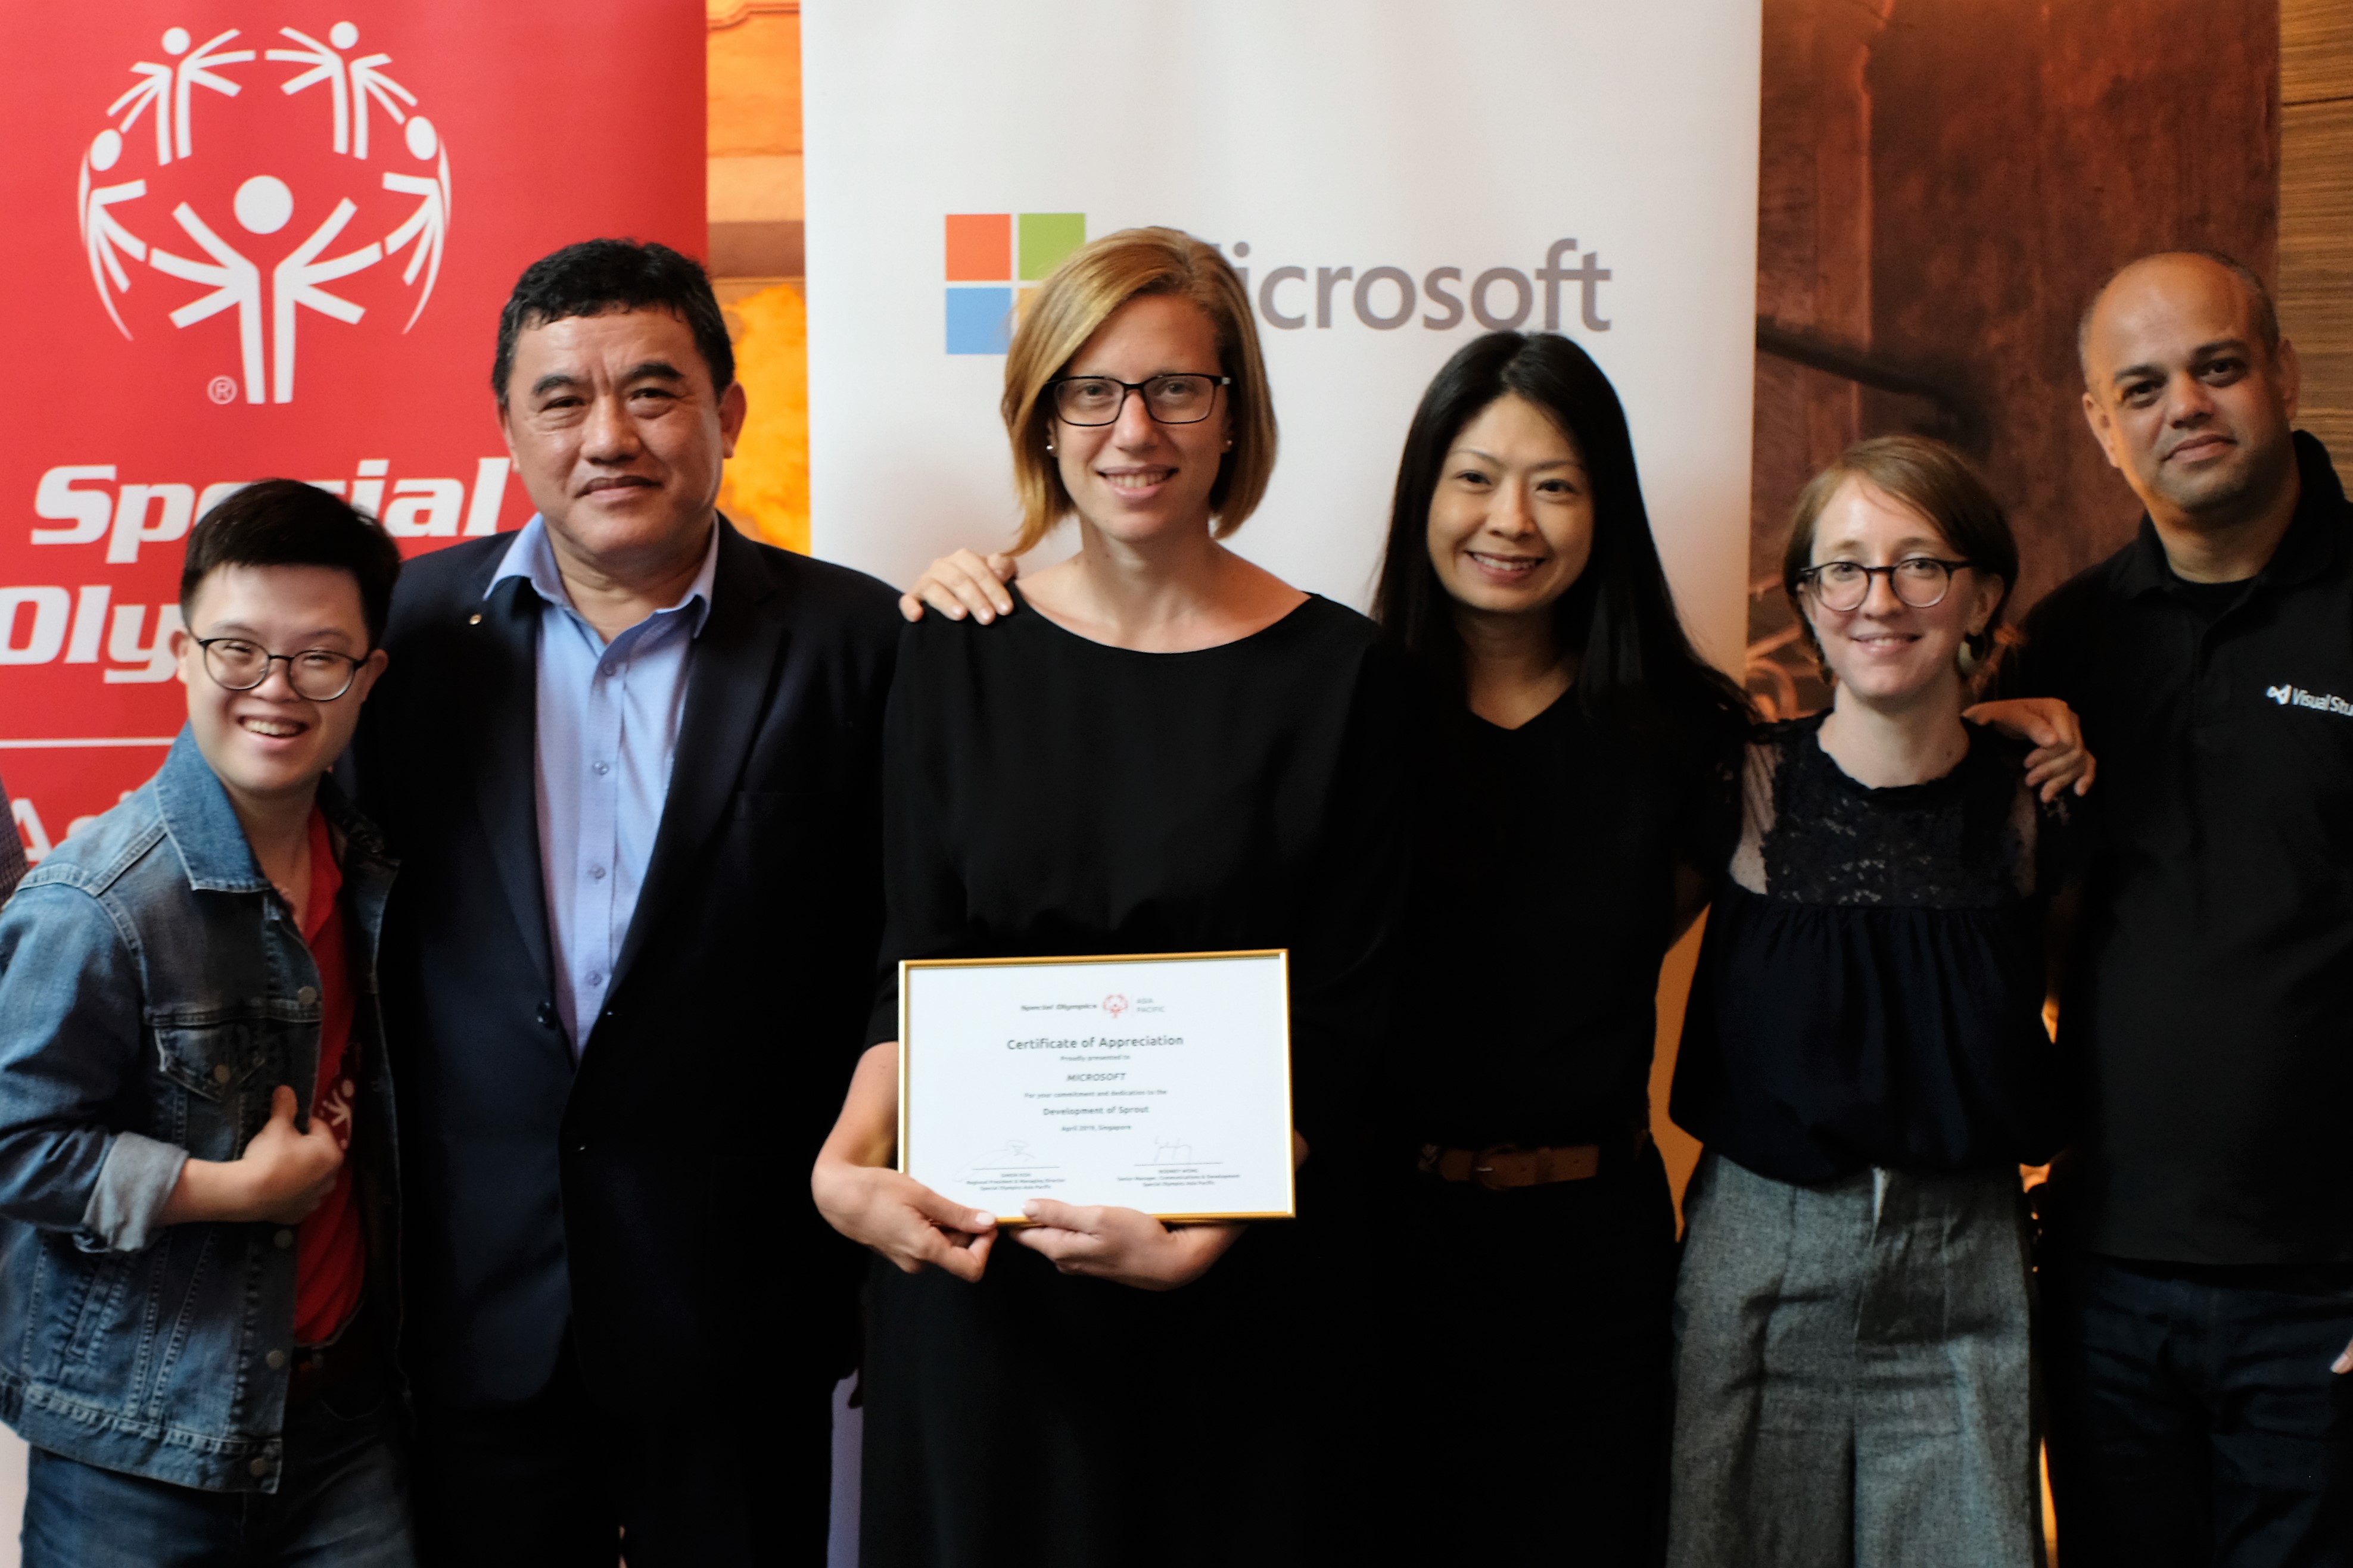 The SPROUT project team from Special Olympics, Microsoft, Empire Code and Palo IT